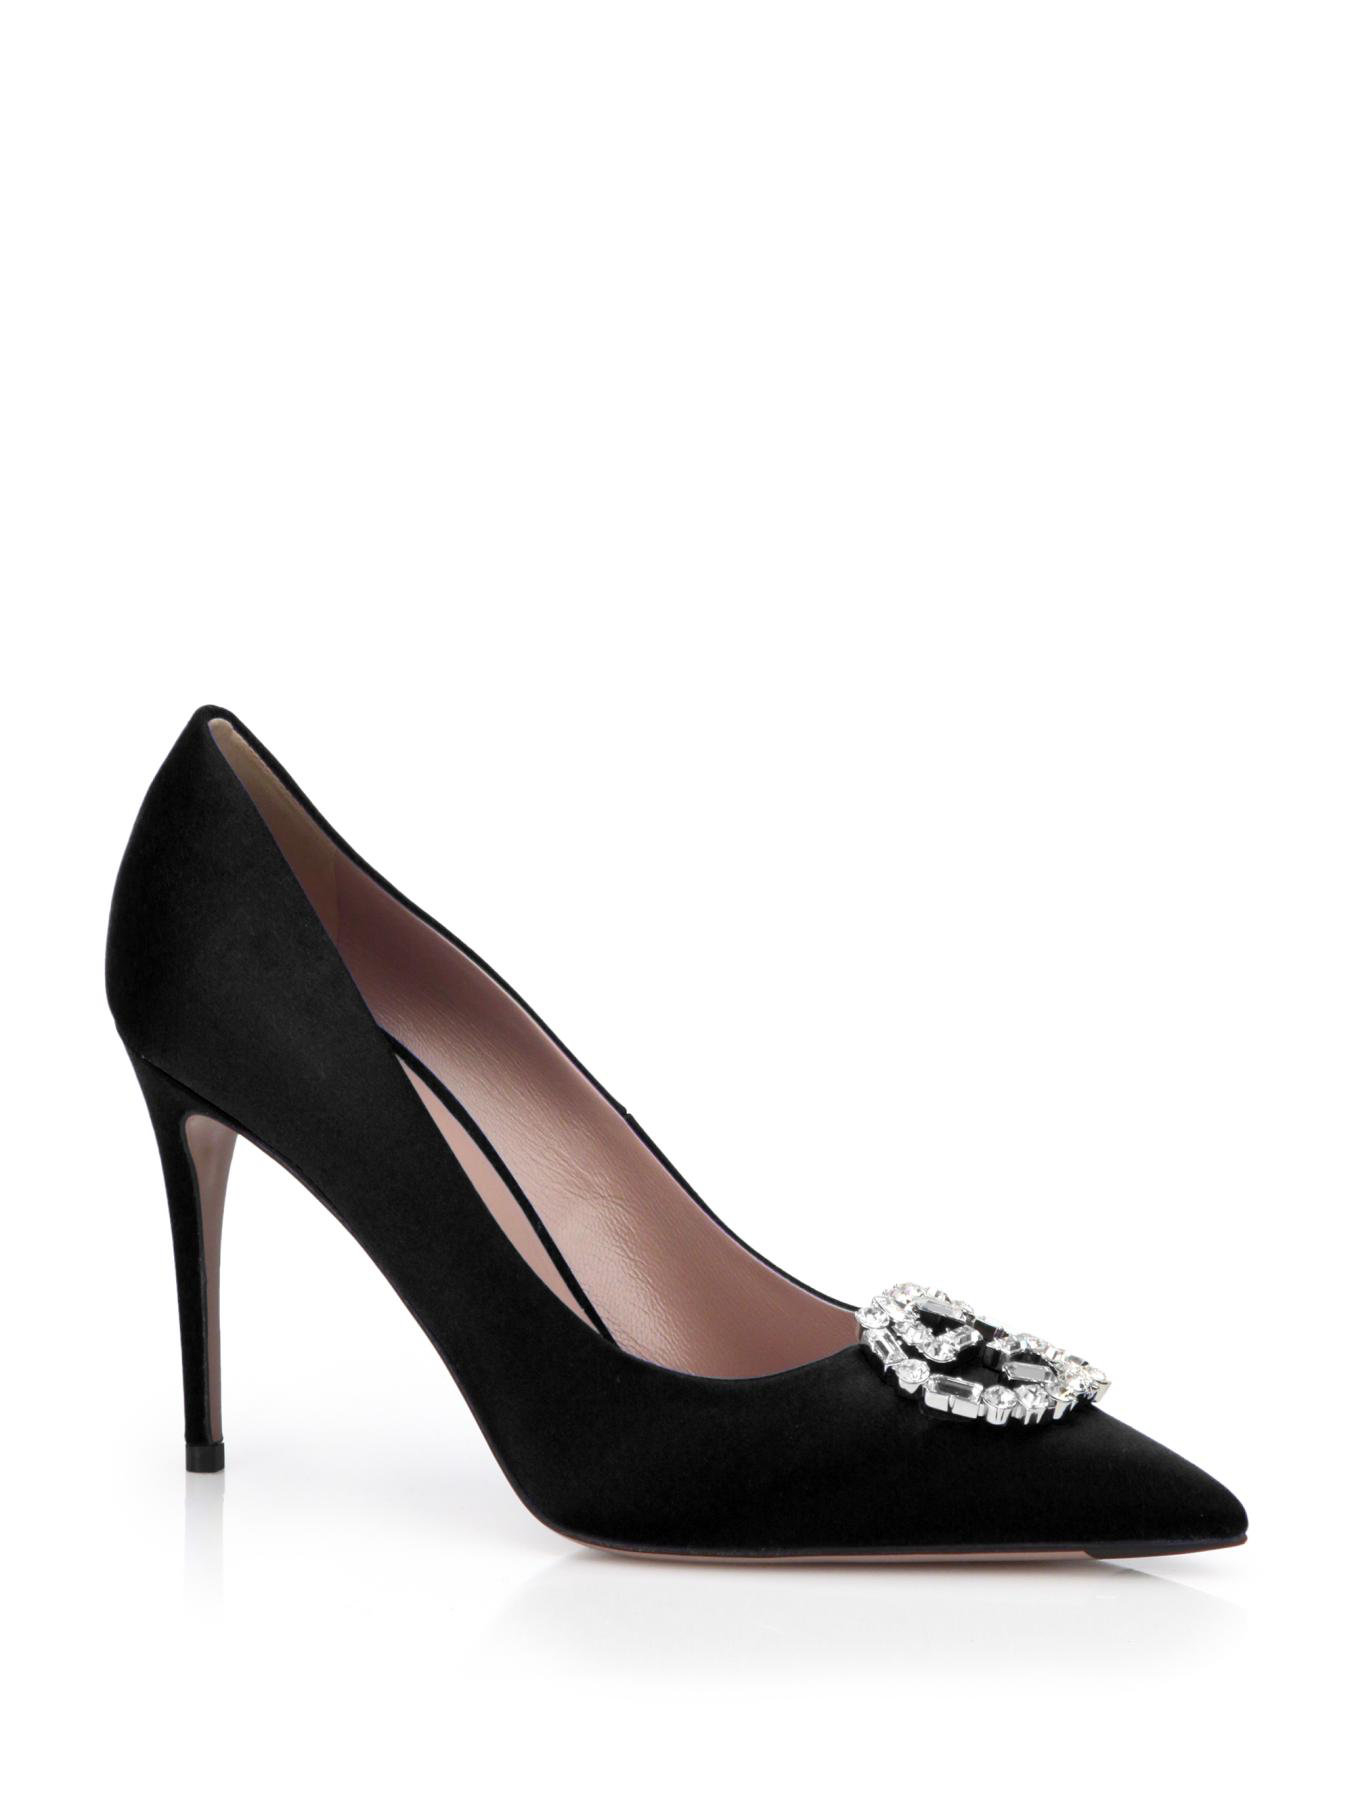 Gucci Gg Crystal Satin Point-toe Pumps in Black | Lyst